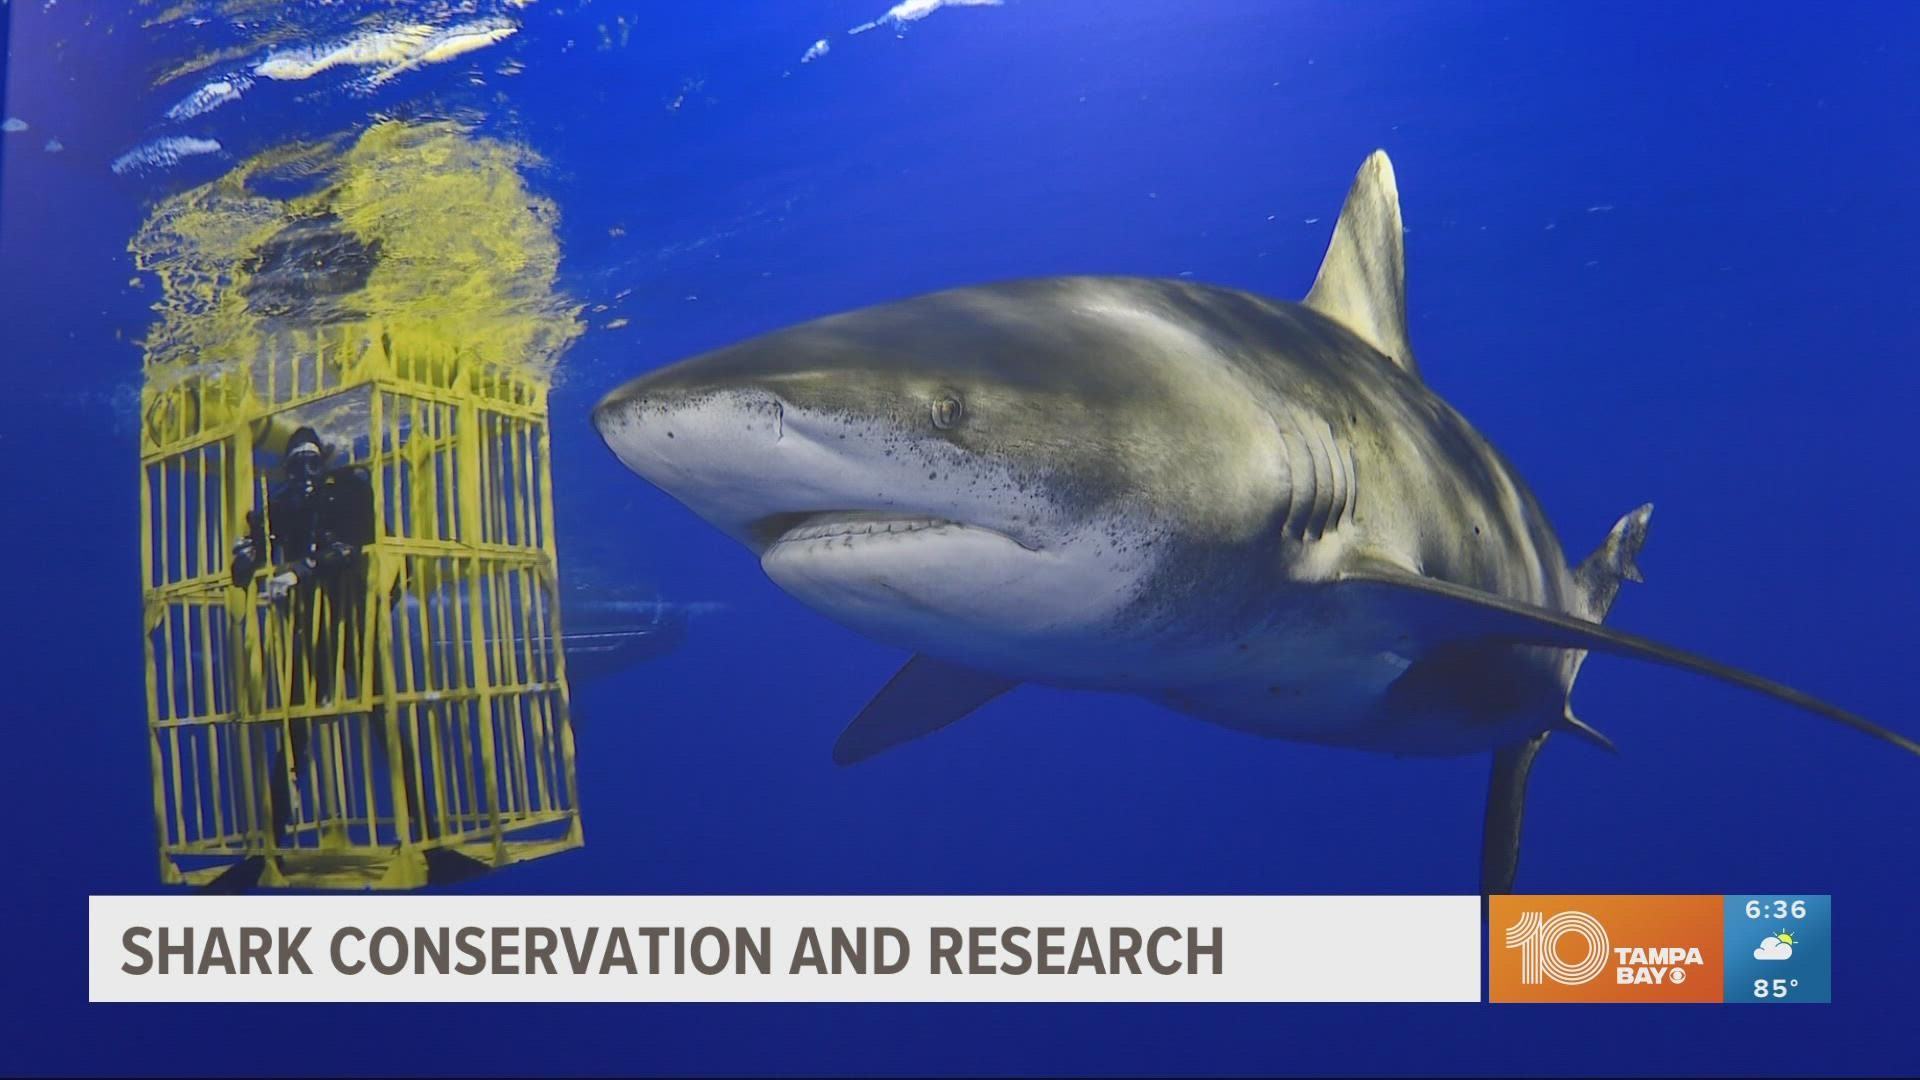 Mote researchers went out last month on a mission to catch and tag sharks, so they can track their behaviors.